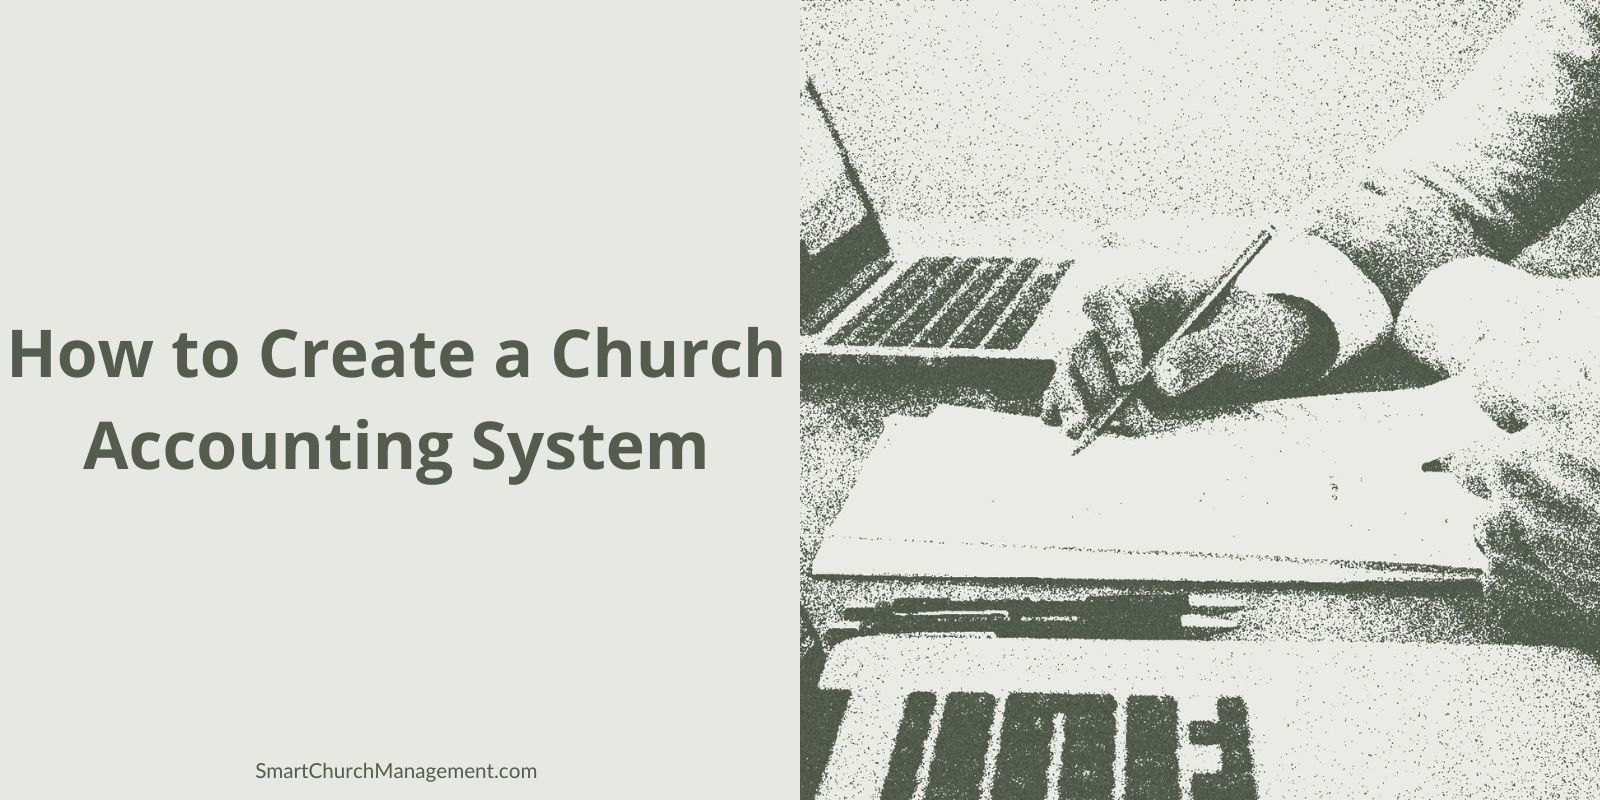 How to create a church accounting system